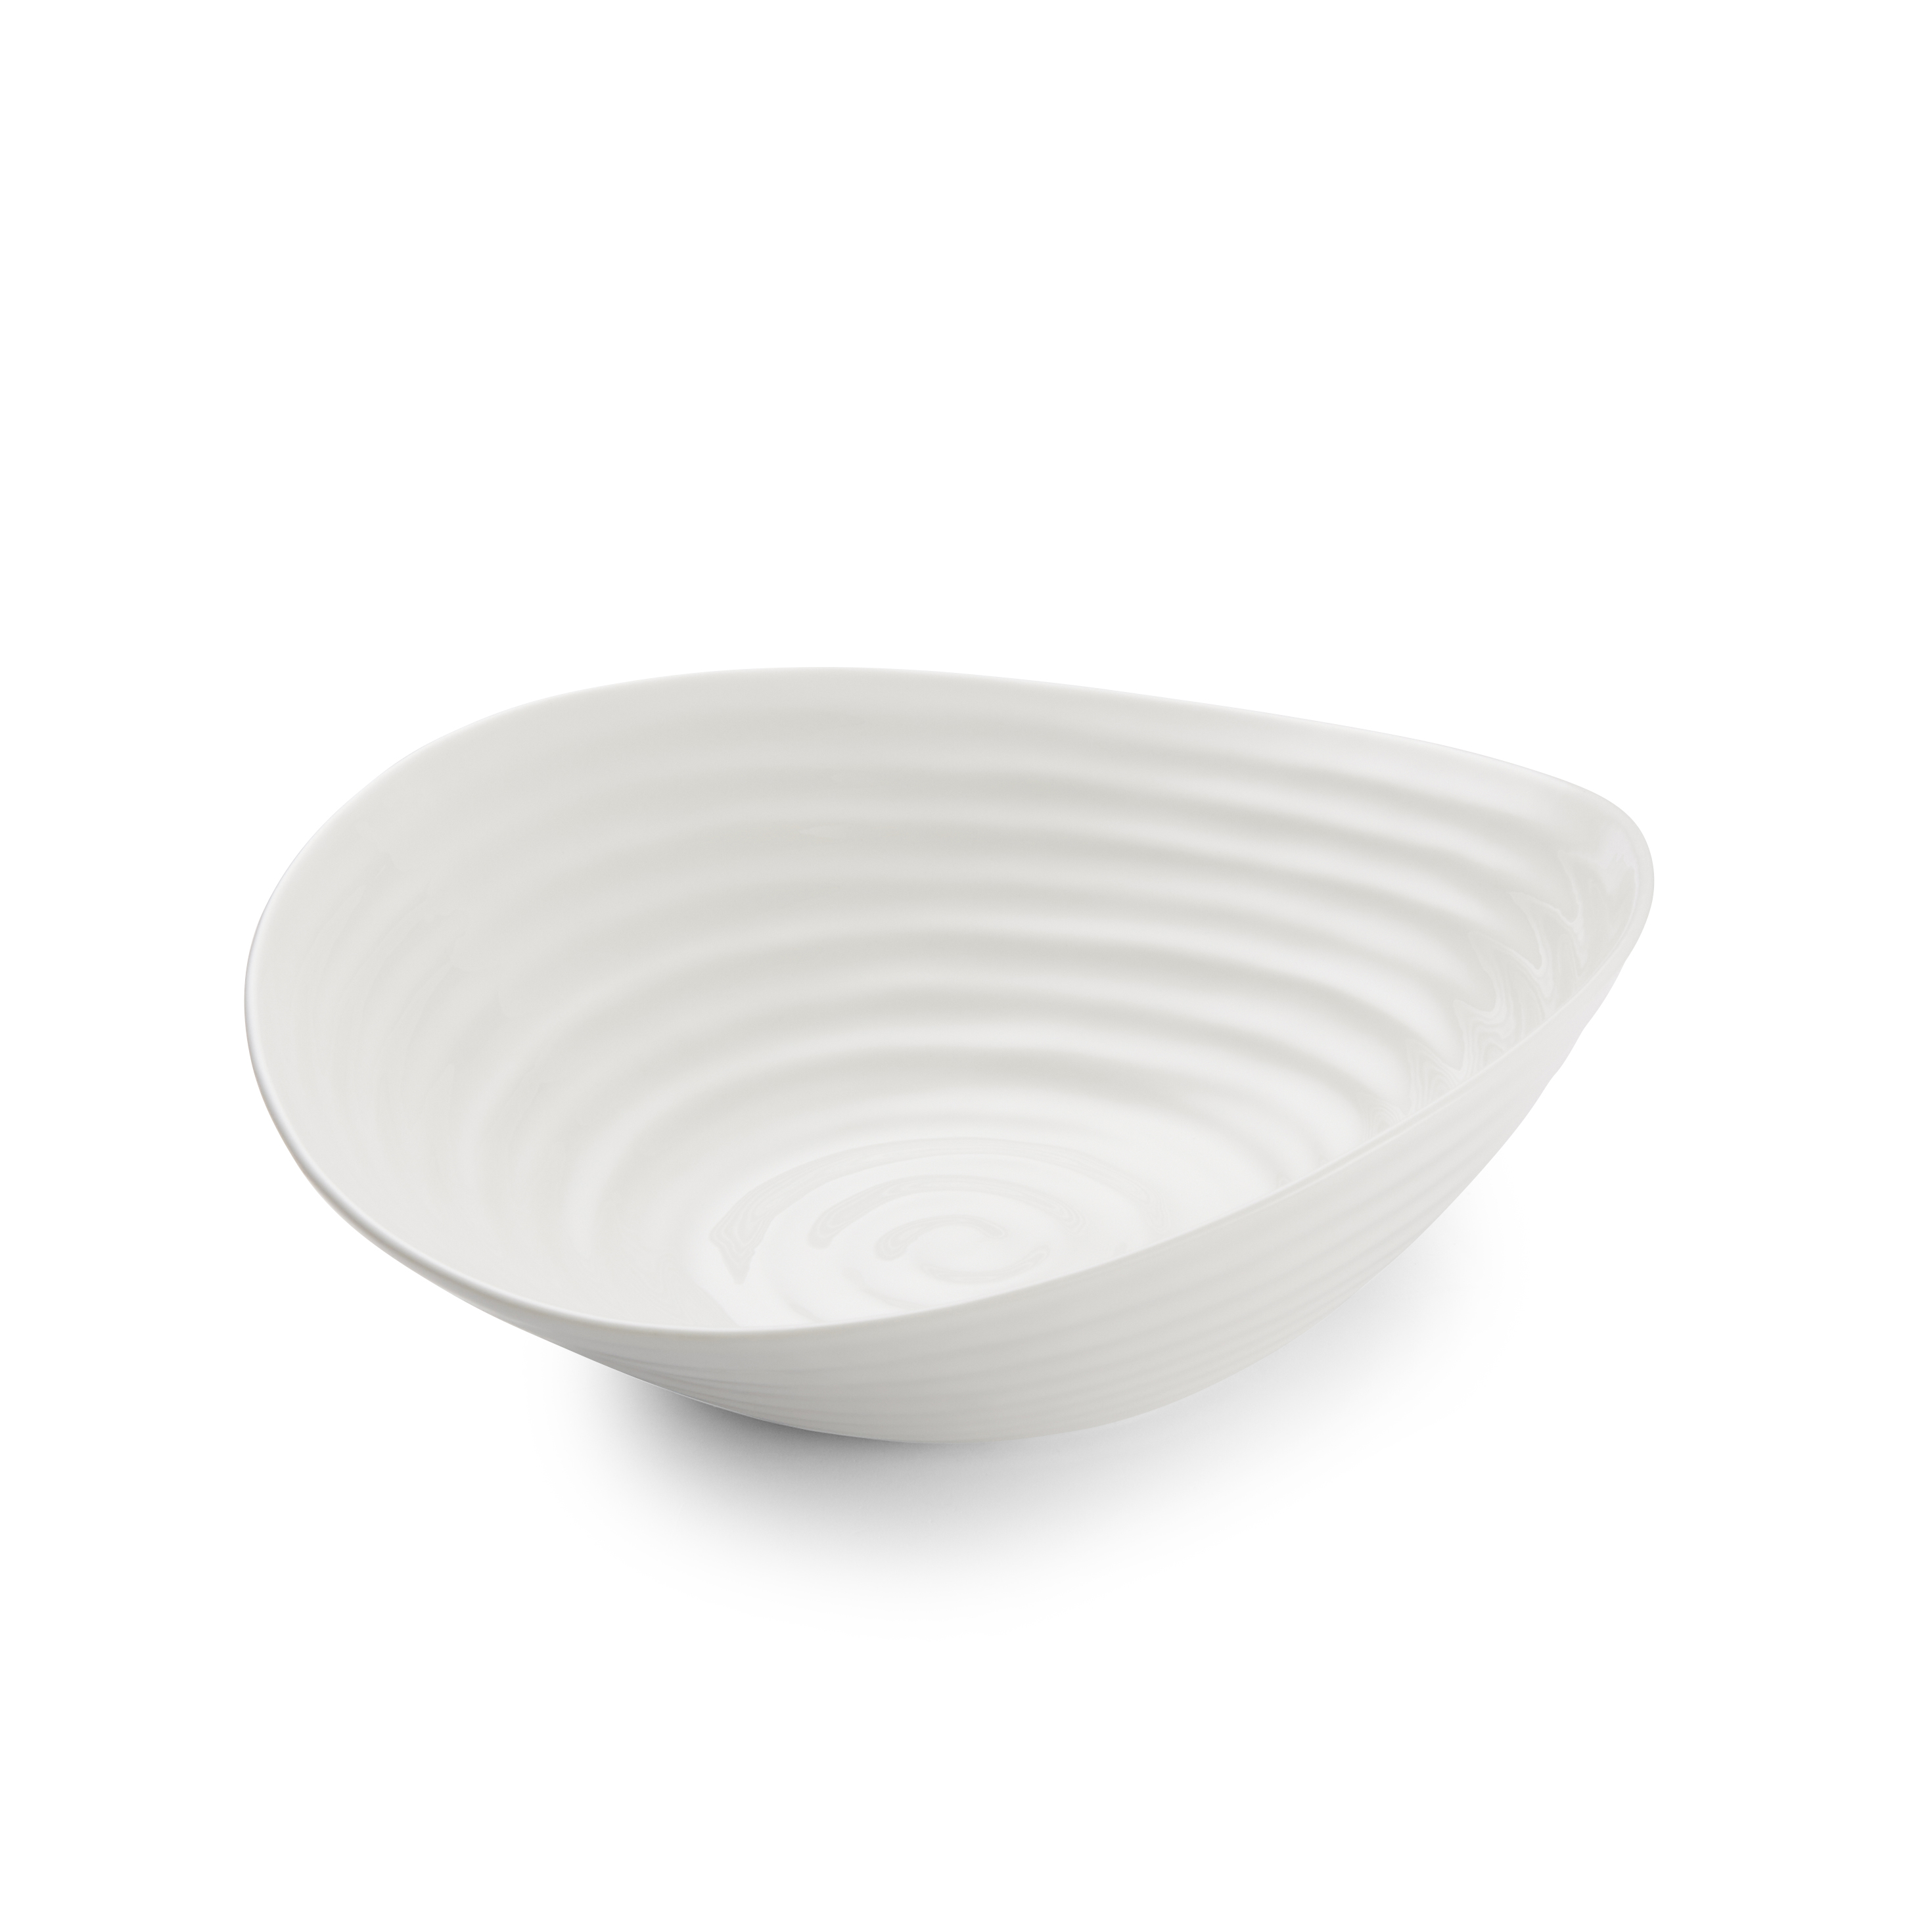 Sophie Conran Small Salad Bowl, White image number null